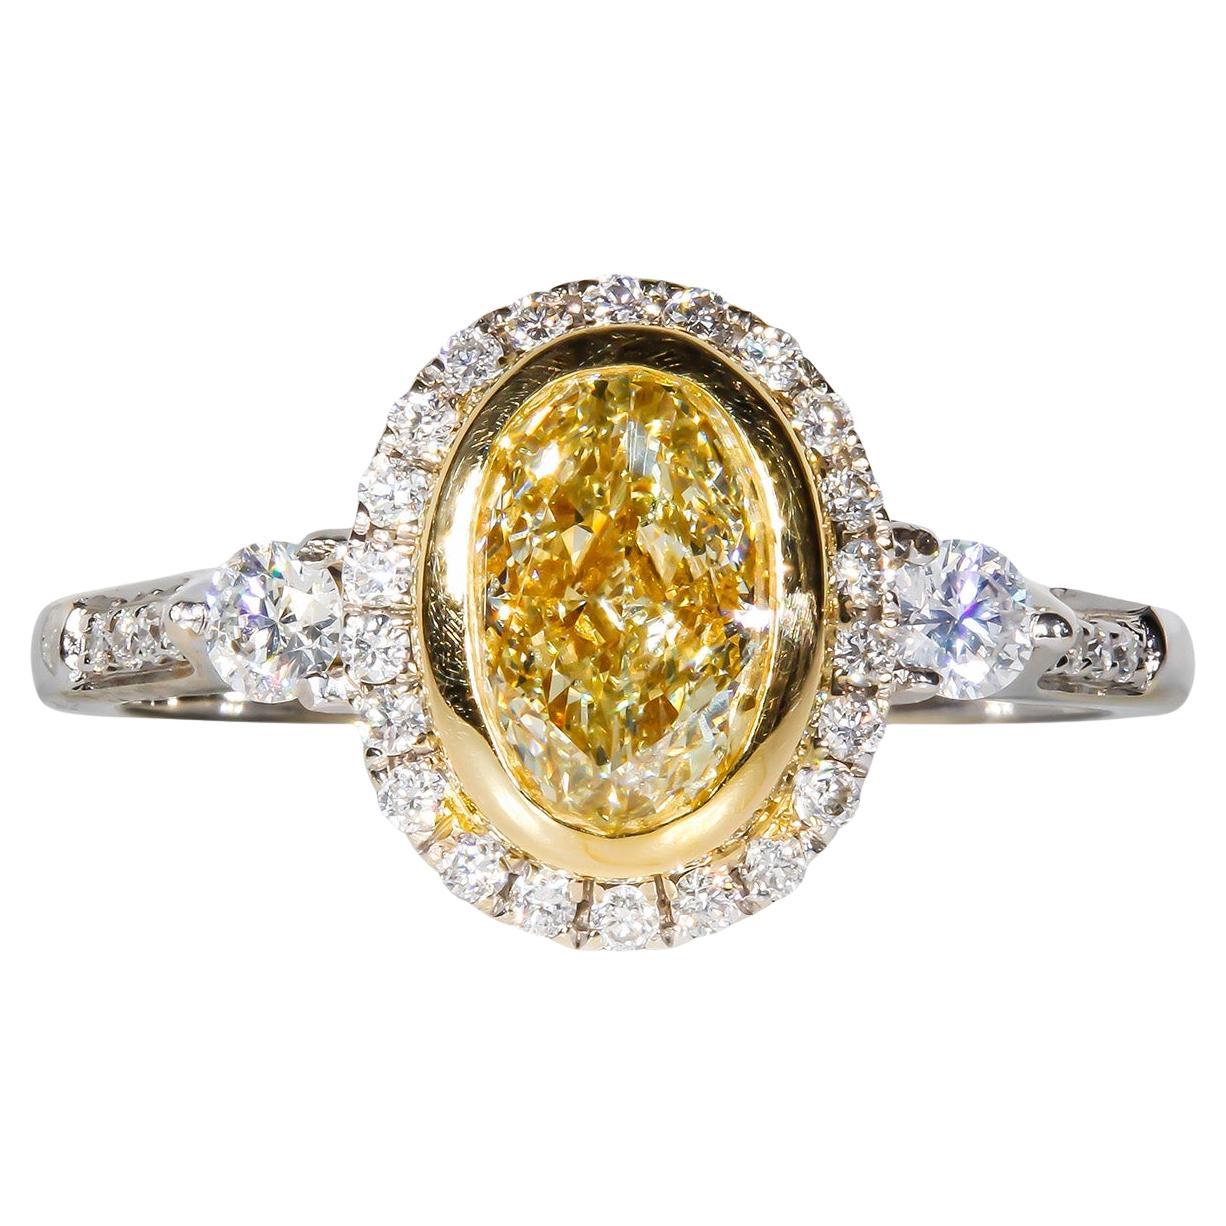 Halo Ring in 18K WG with Fancy Light Yellow Oval Diamond Center. D1.36ct.t.w. For Sale